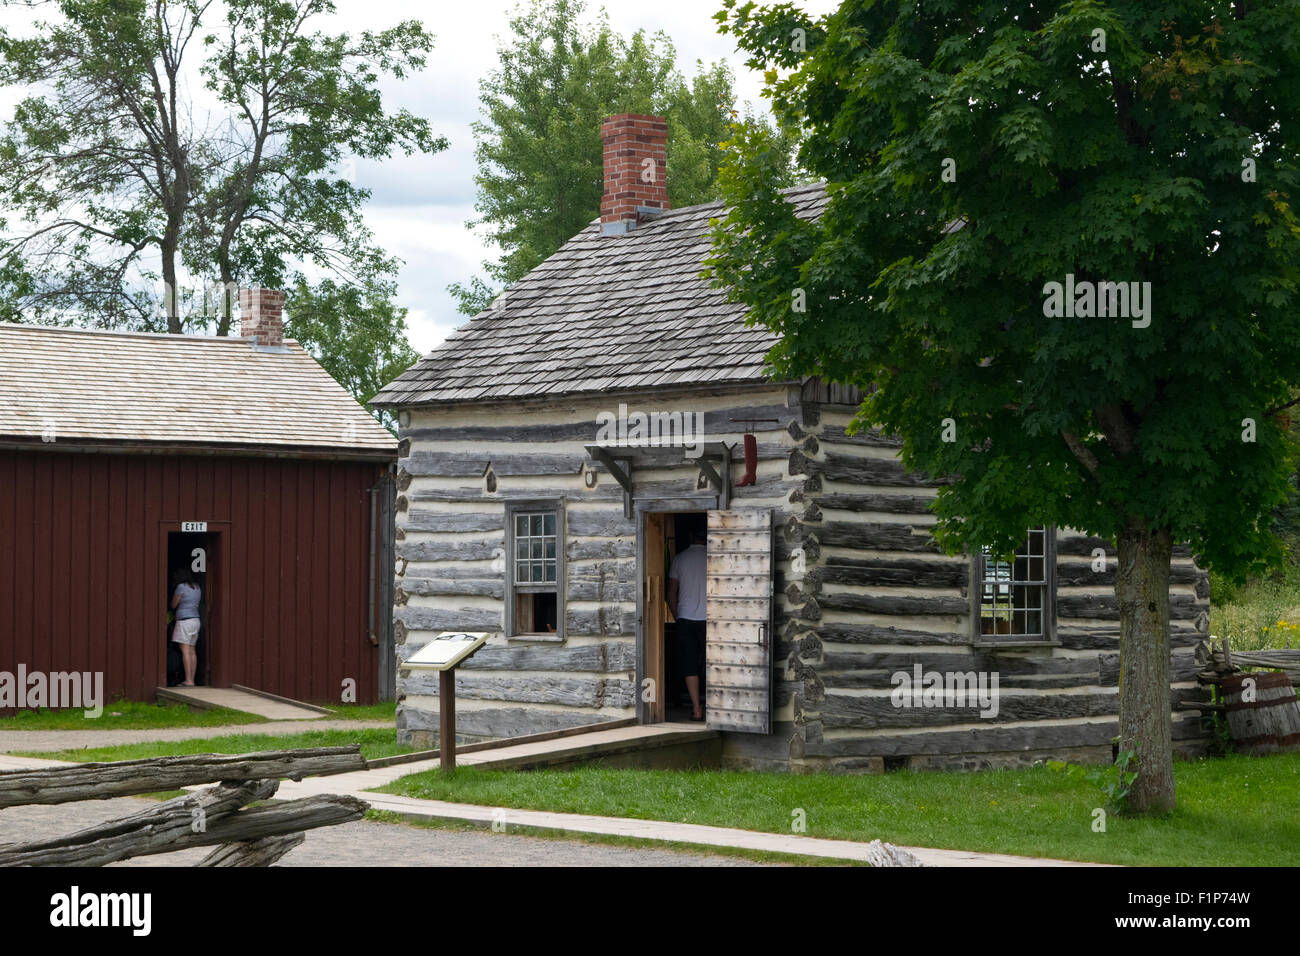 The Shoemaker's cabin at Upper Canada Village. Stock Photo